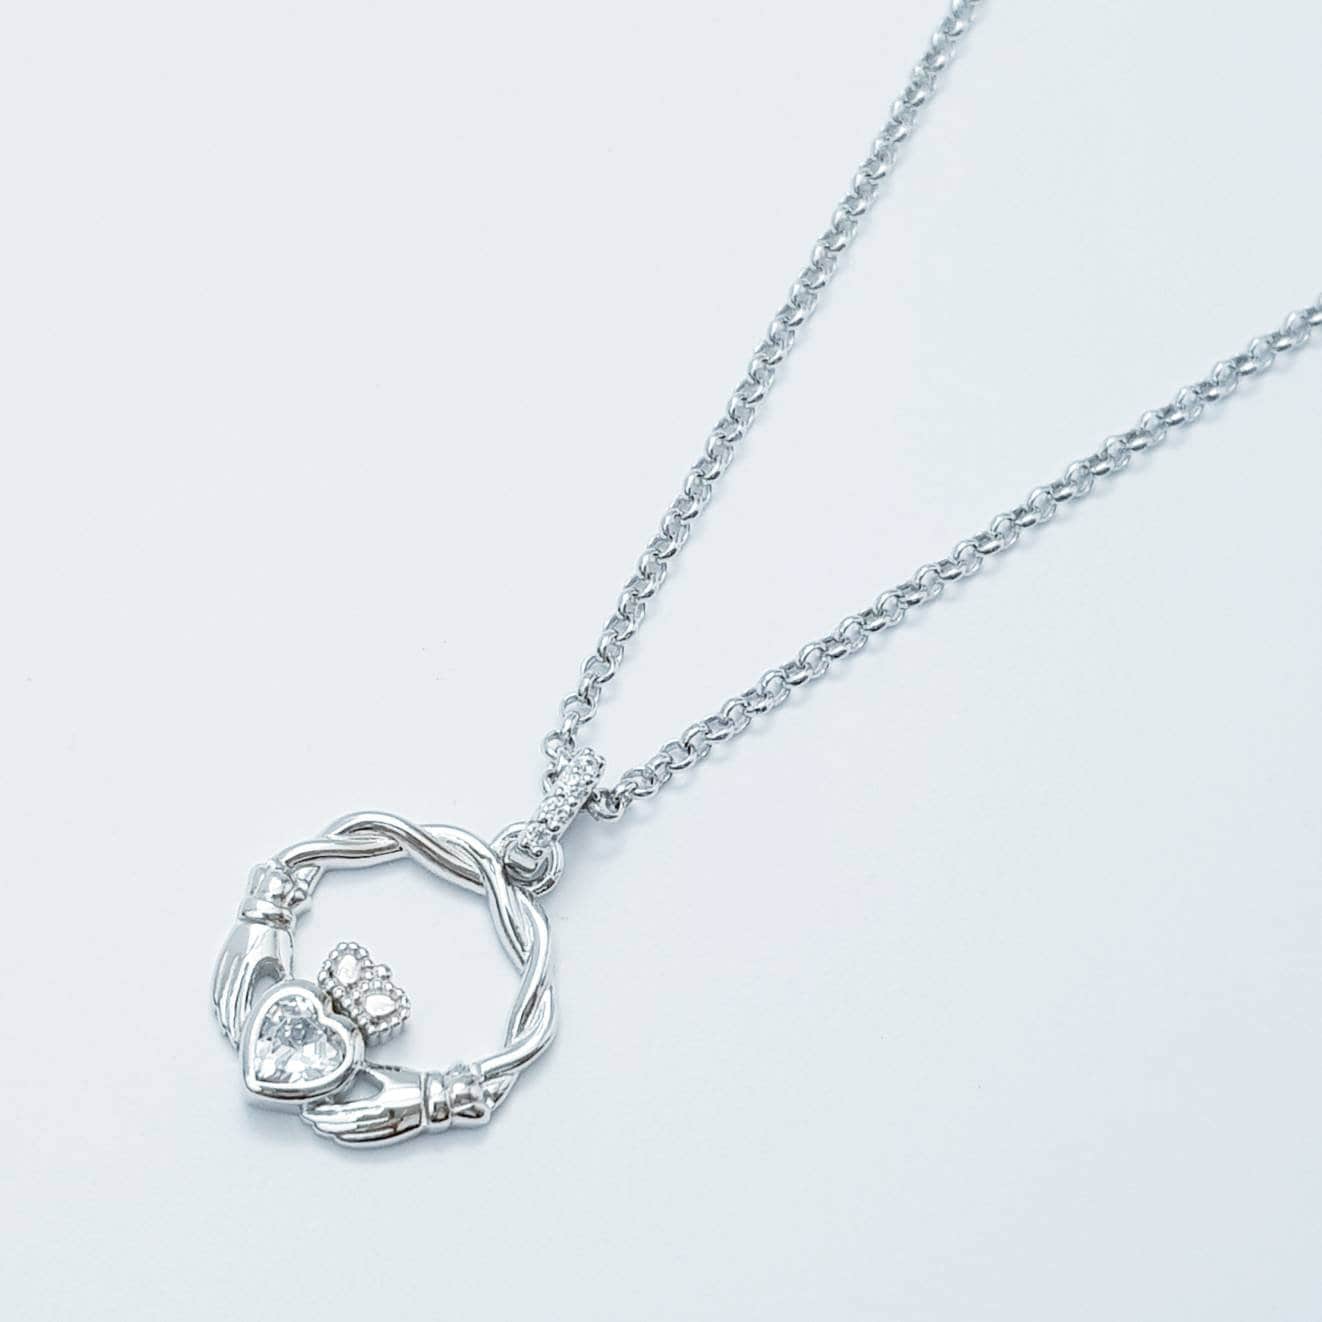 Dainty Sterling Silver claddagh necklace